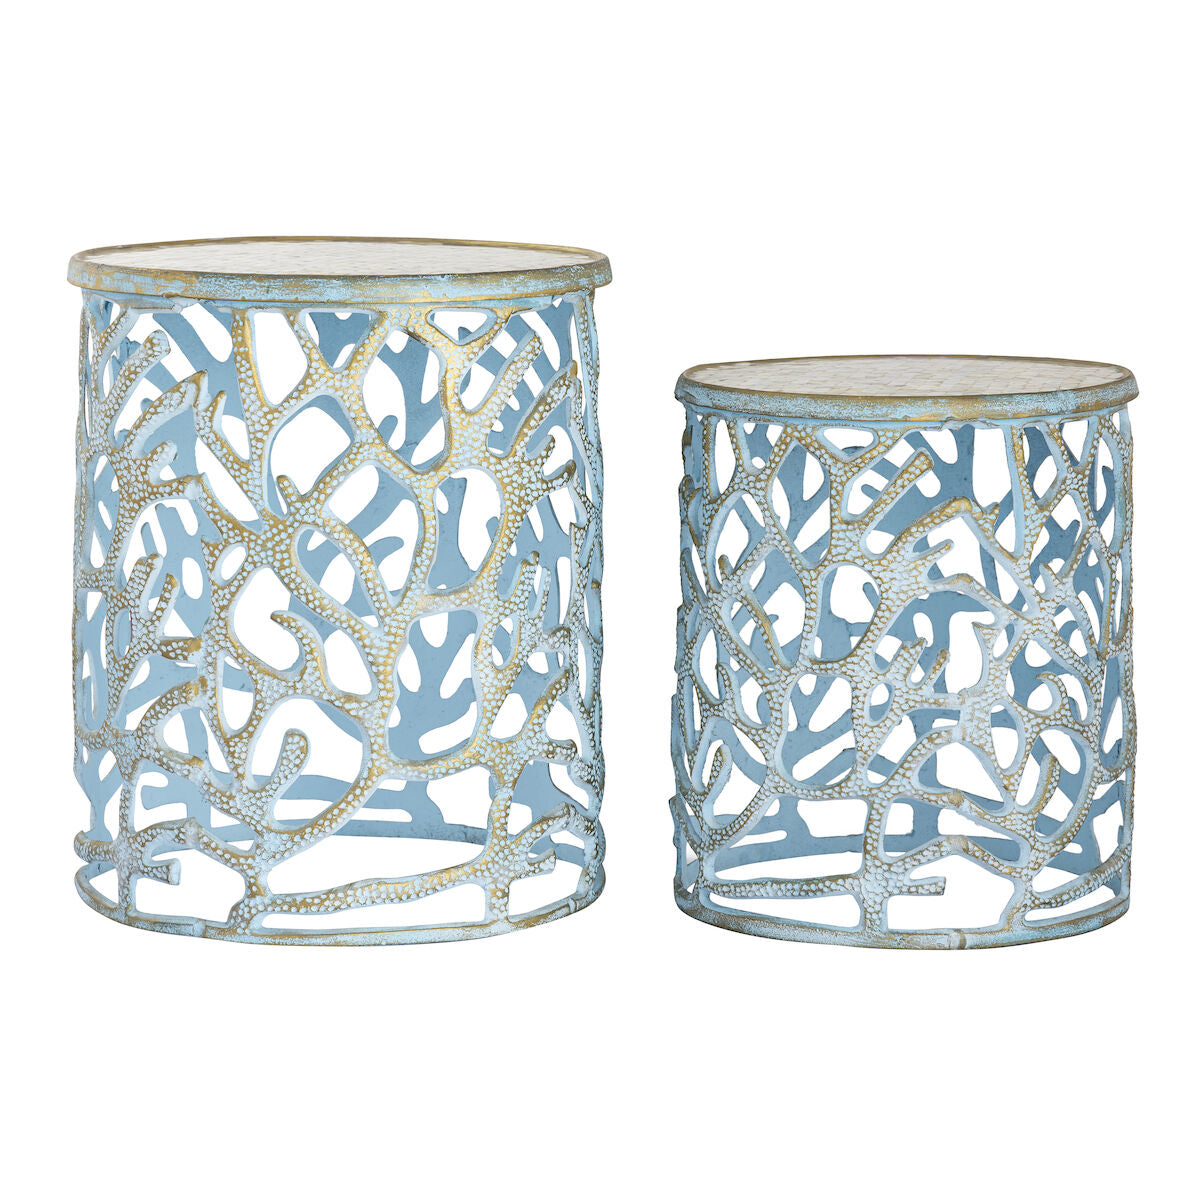 Coral Motif Table - Set of 2